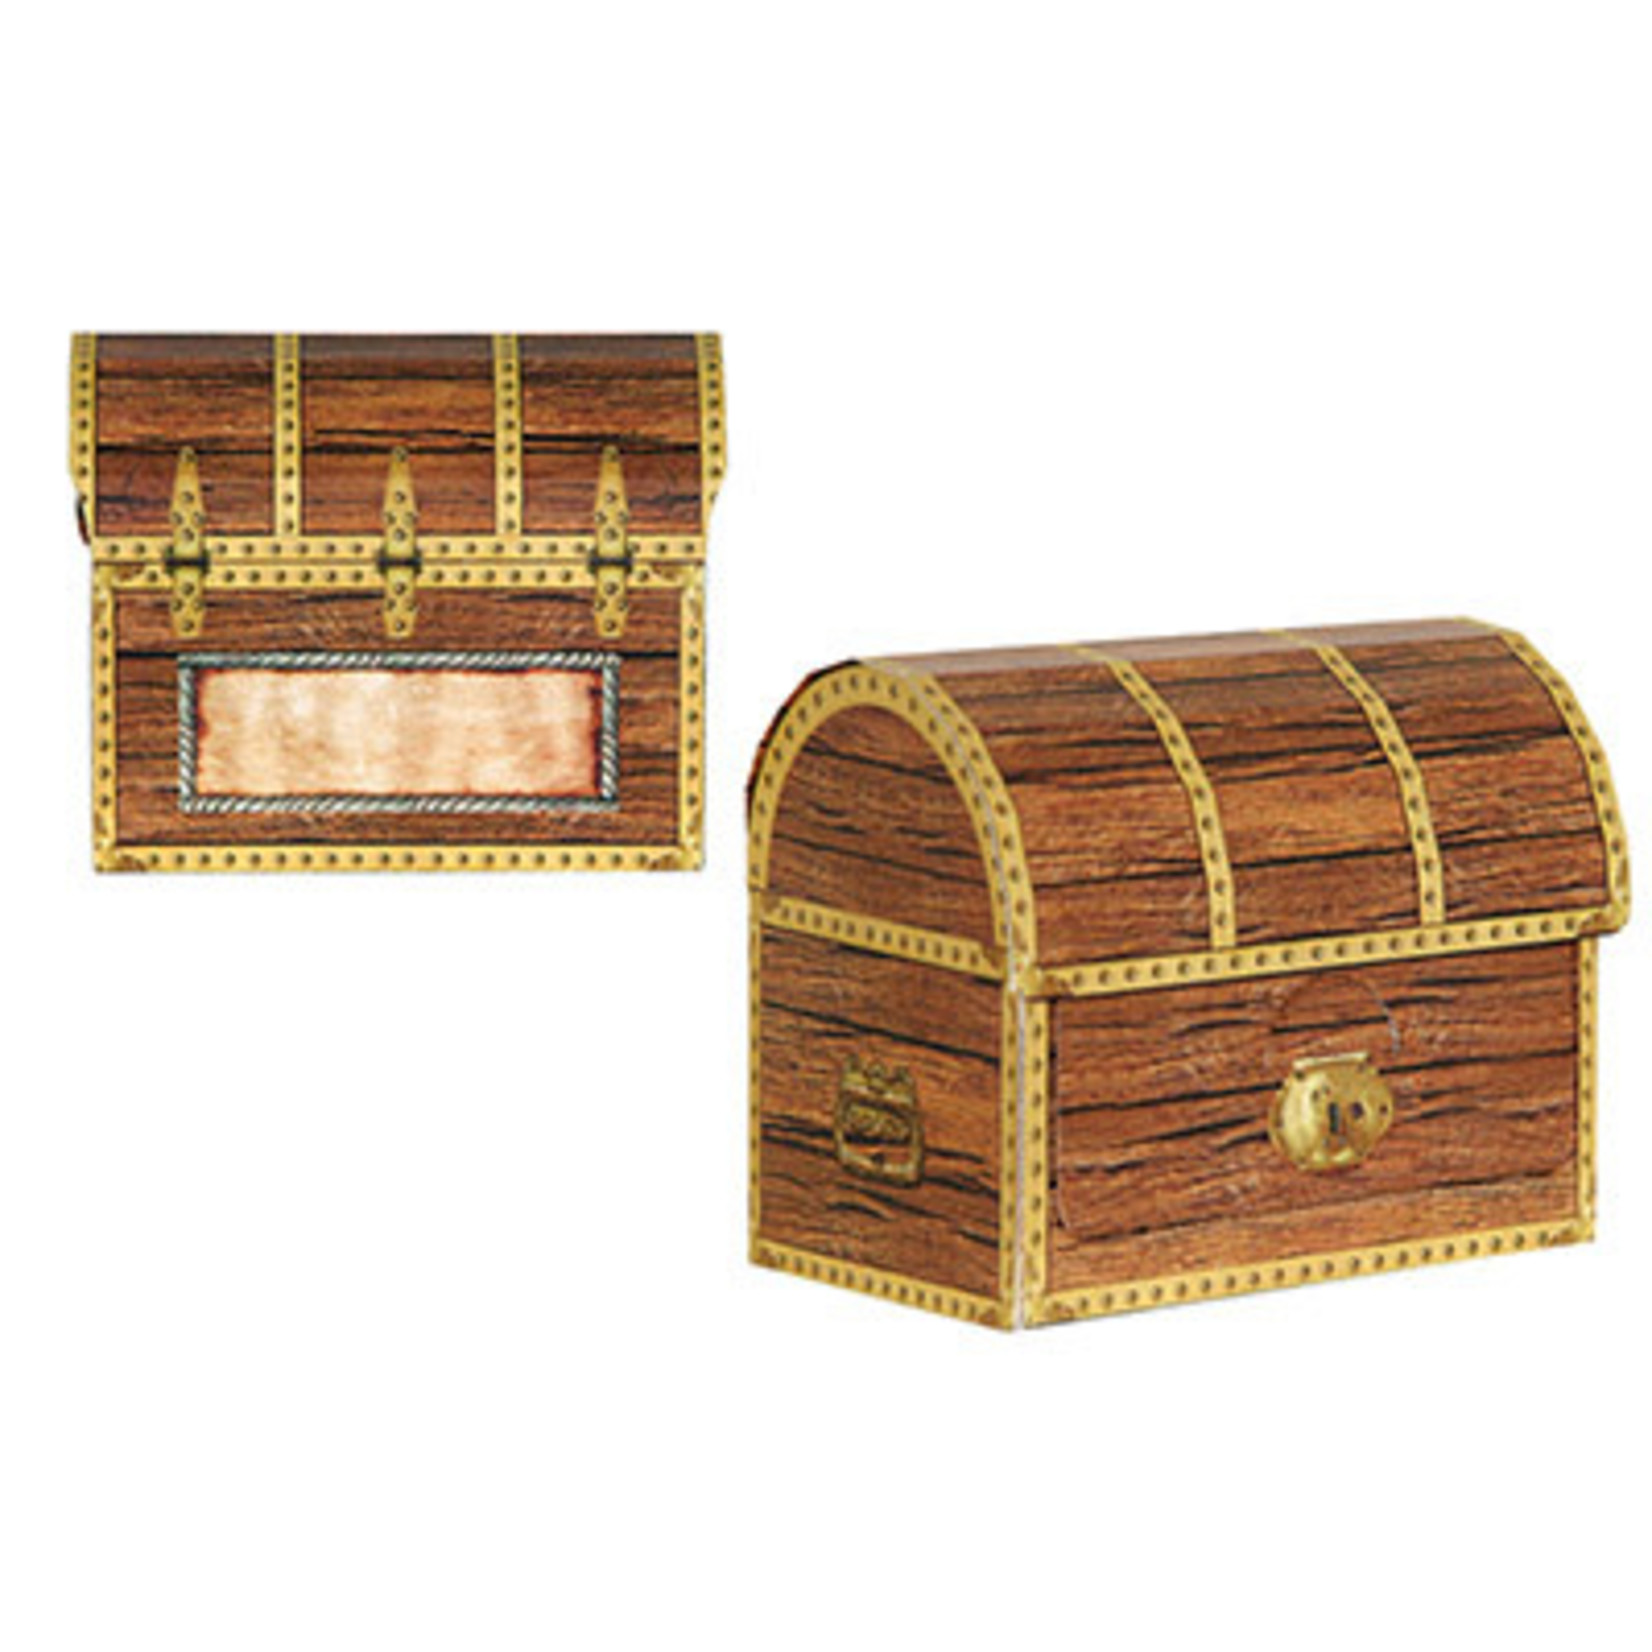 Beistle Pirate Treasure Chest Favor Boxes - 4ct.